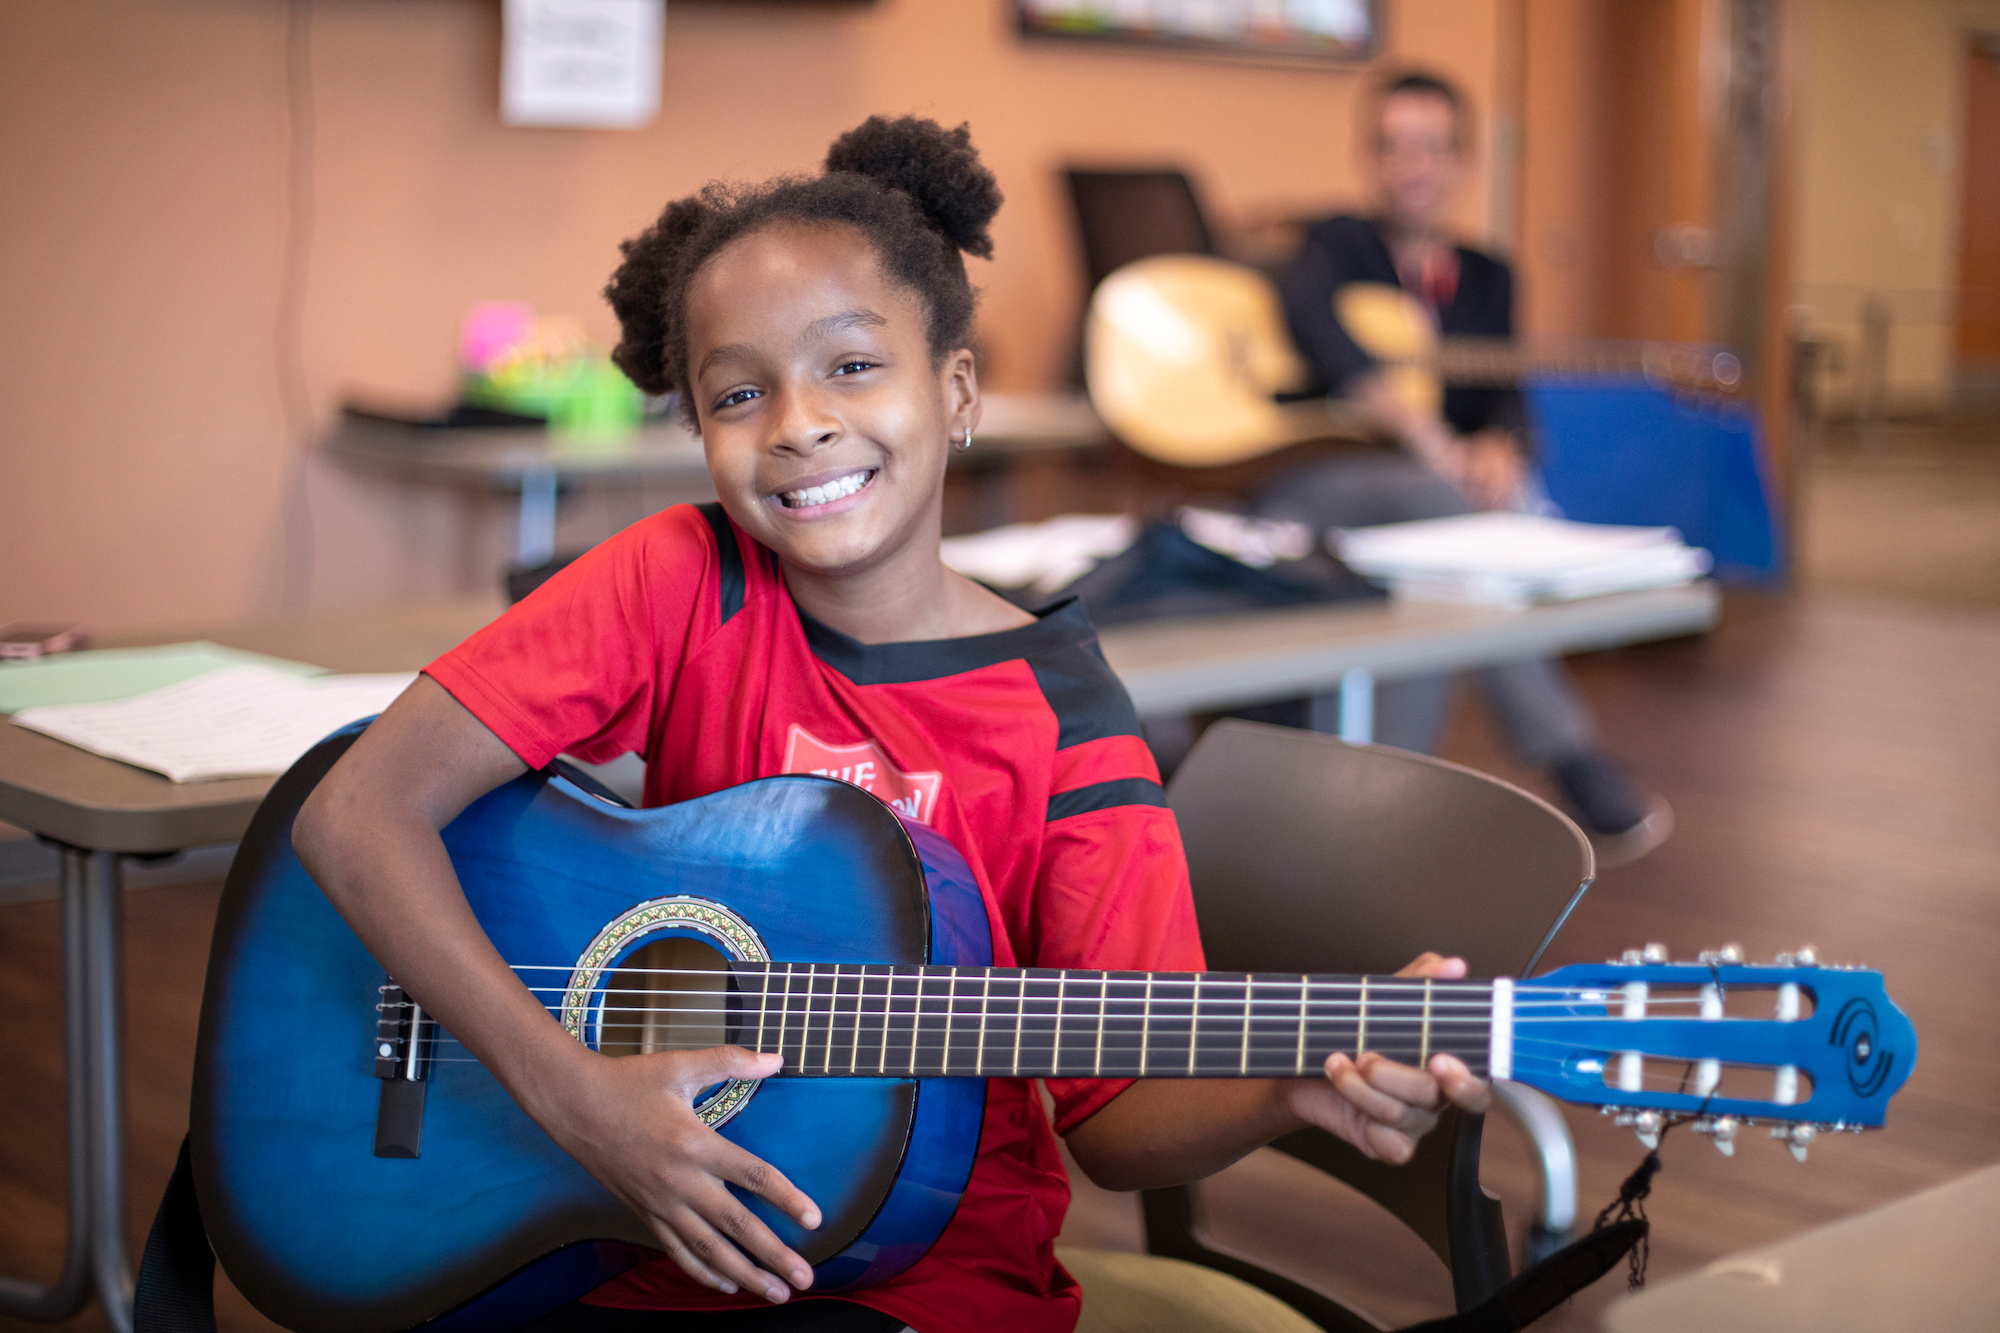 young girl smiling with a guitar